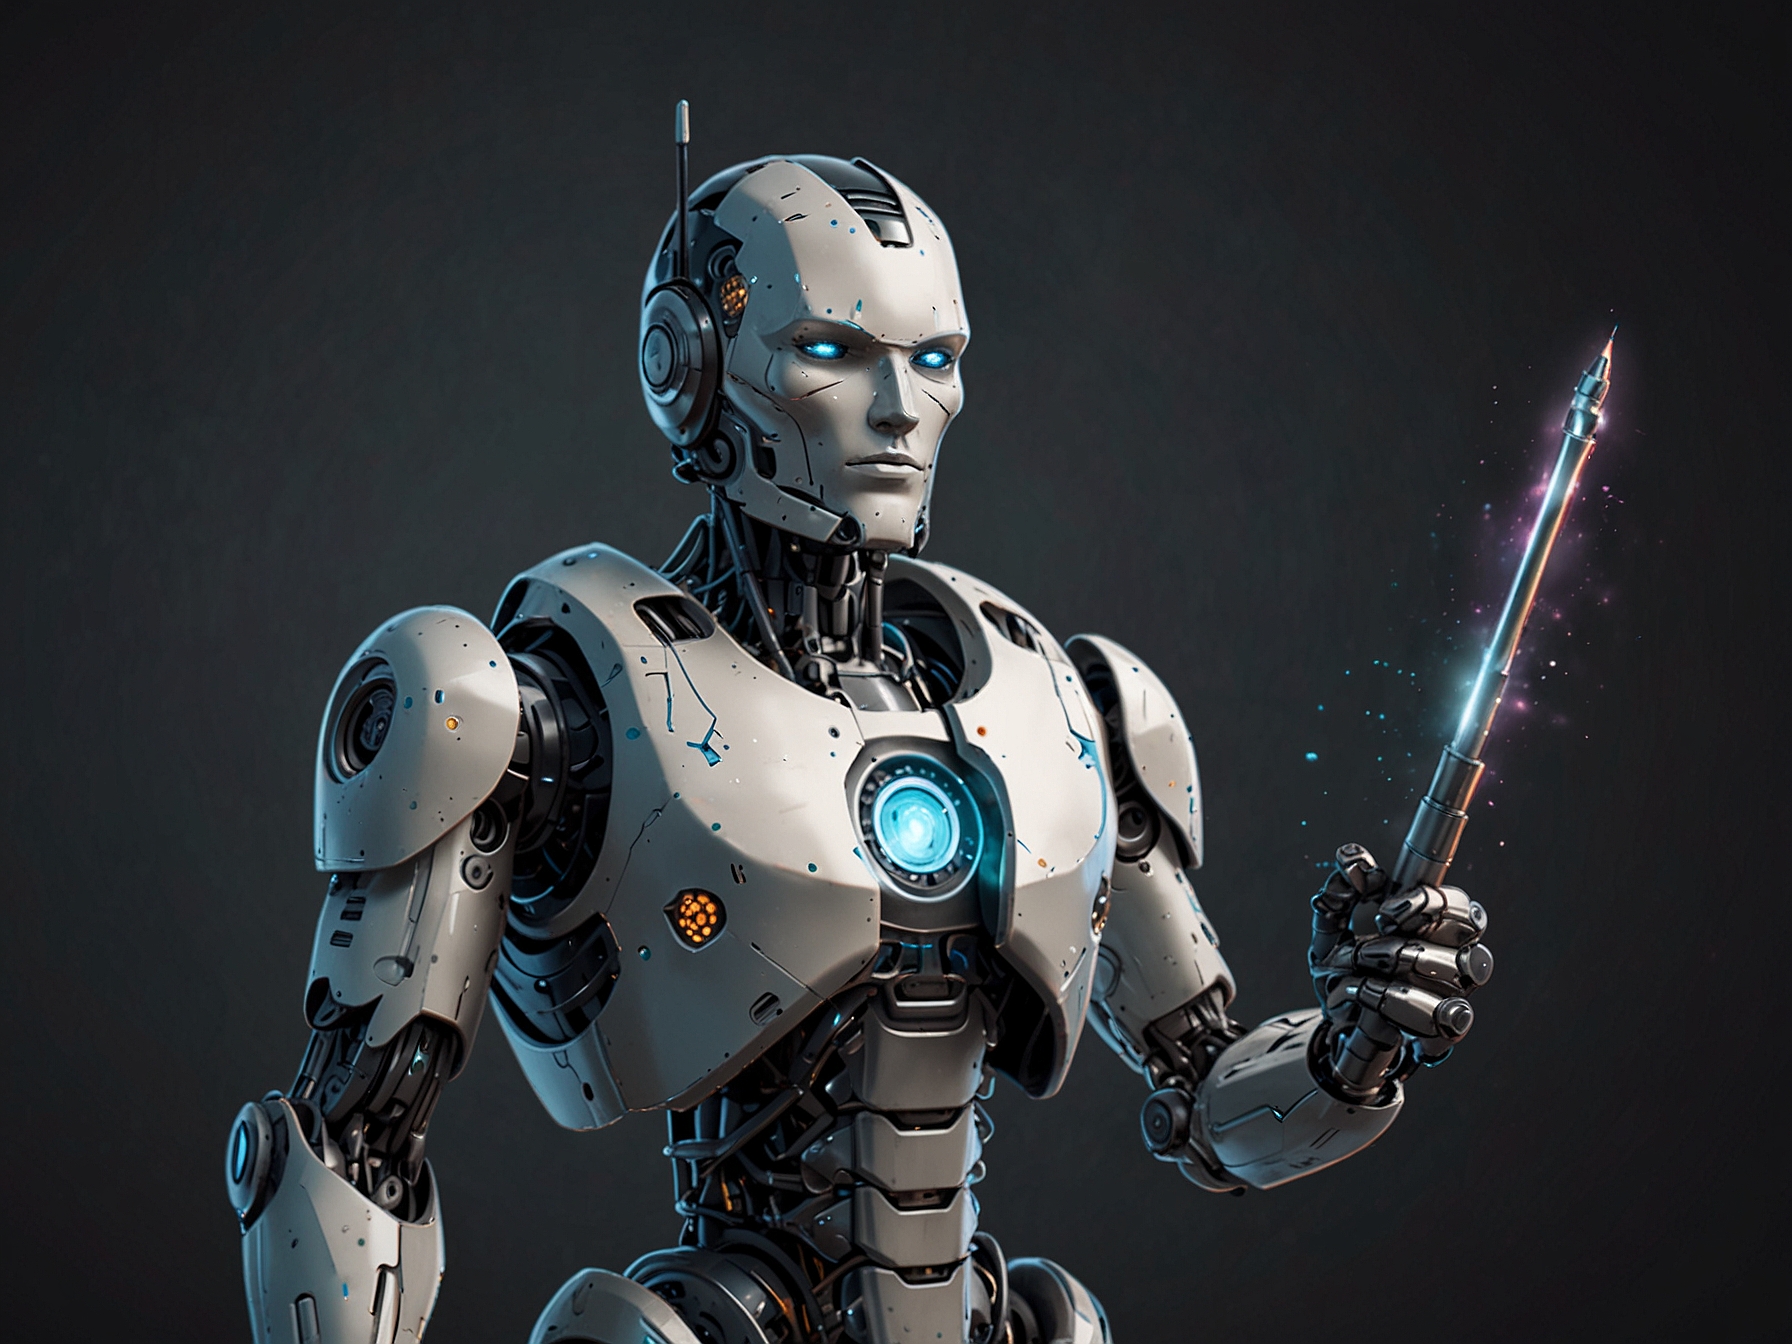 An illustration of an AI robot holding a magic wand, symbolizing the misconception that AI can solve all problems effortlessly.